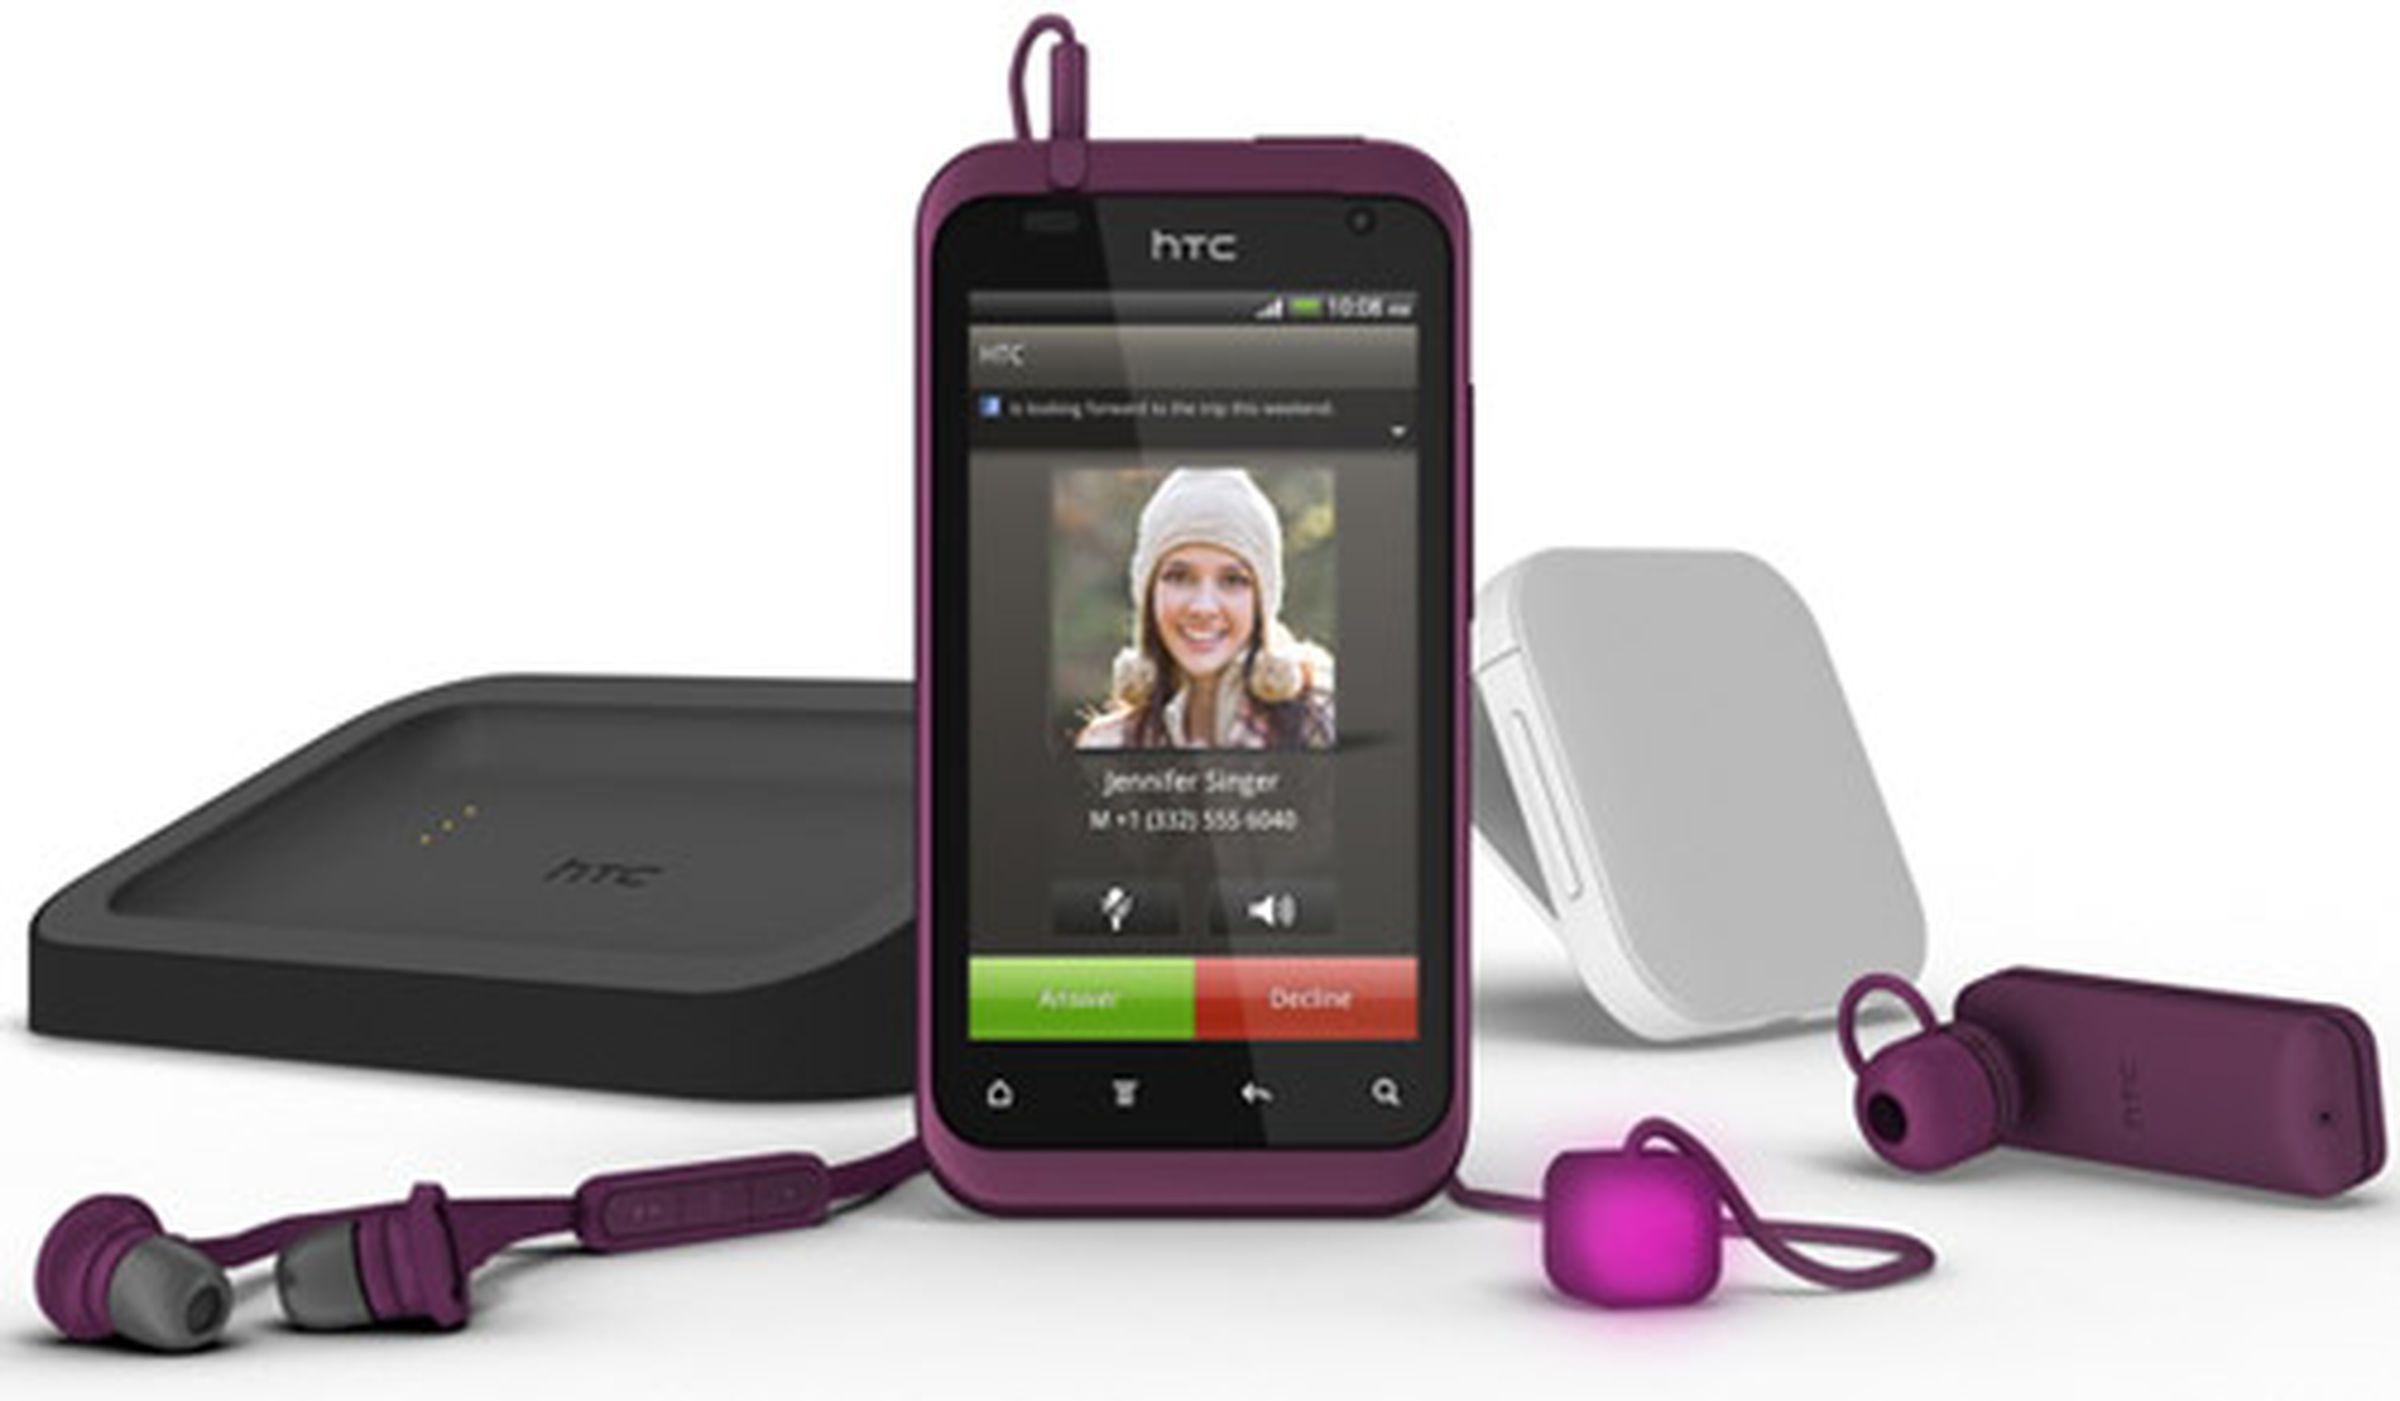 HTC Rhyme announcement photo gallery